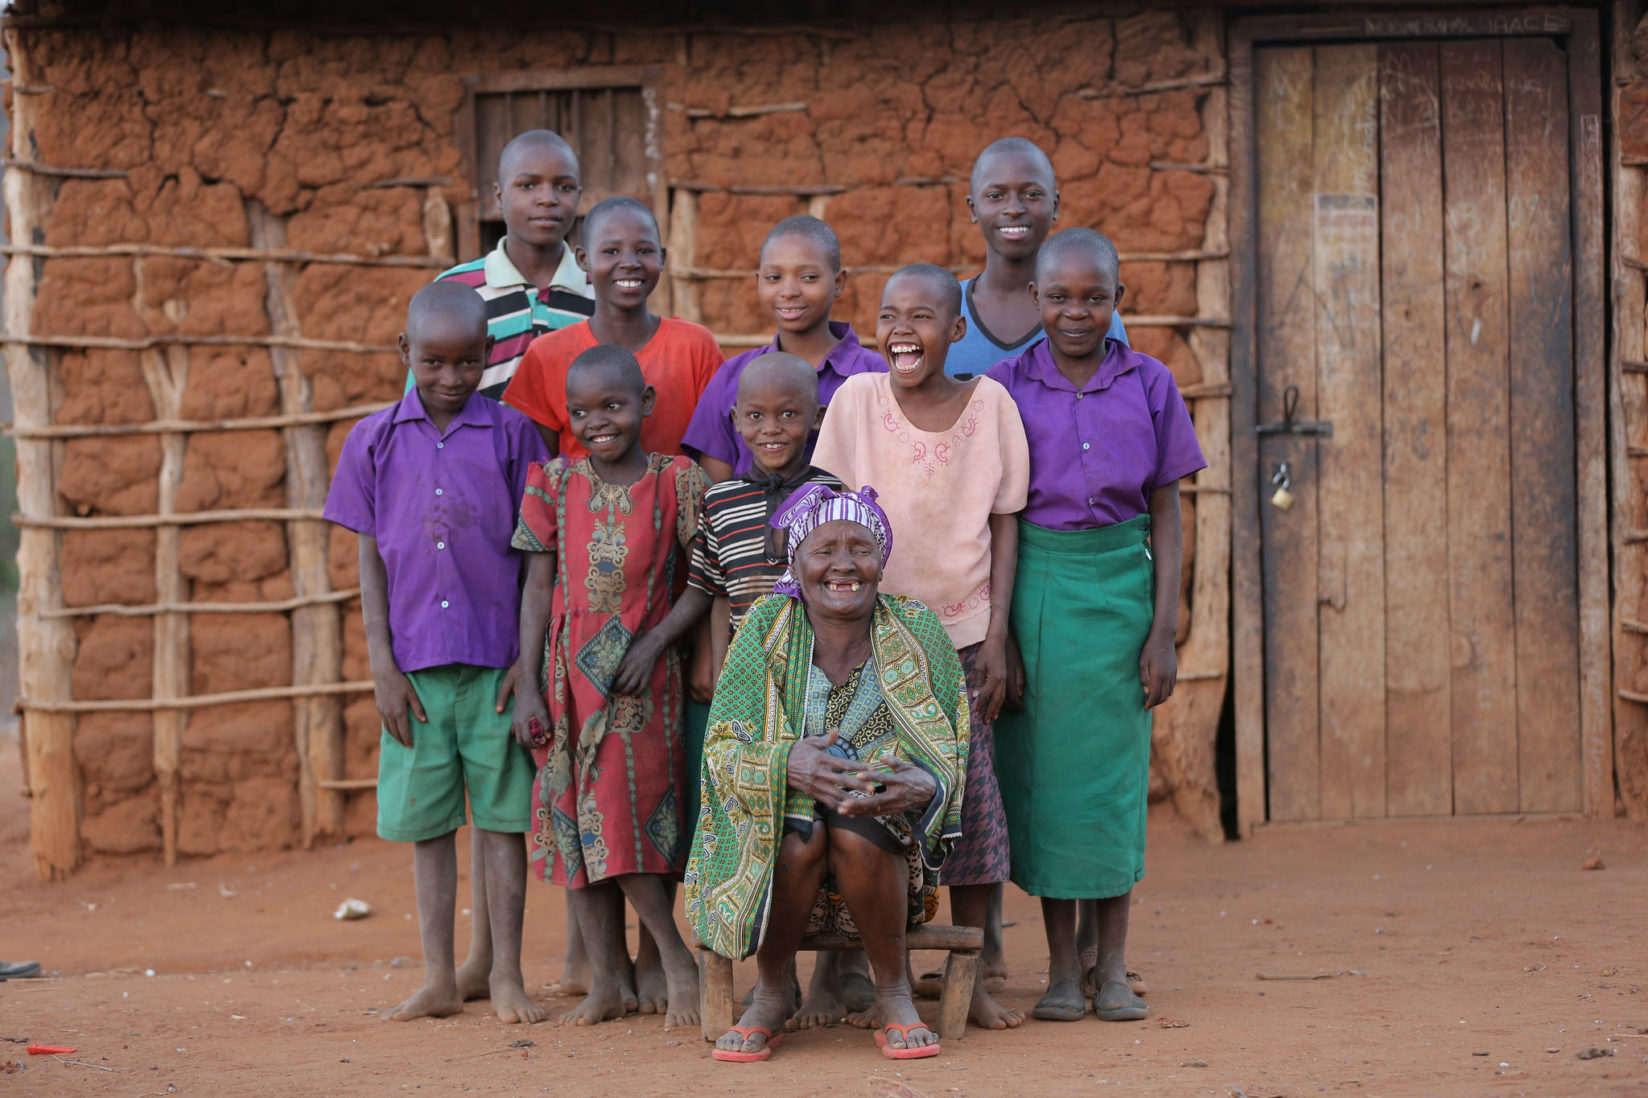 Grandma Grace and her grandchildren in front of their mud home